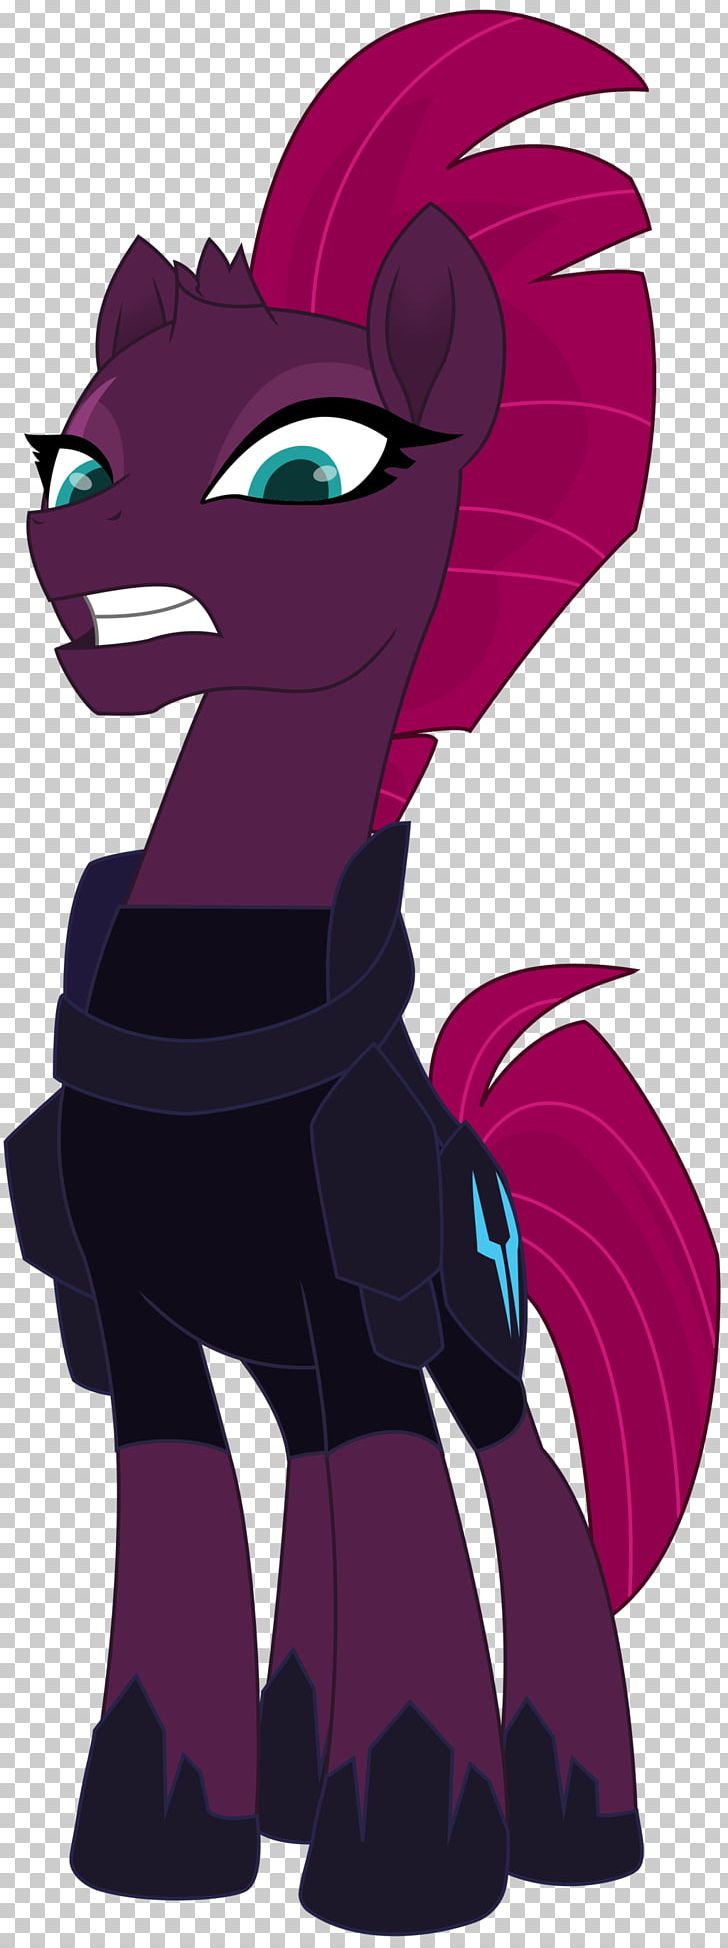 My Little Pony Tempest Shadow Twilight Sparkle PNG, Clipart, Cartoon, Deviantart, Fictional Character, Horse, Magenta Free PNG Download